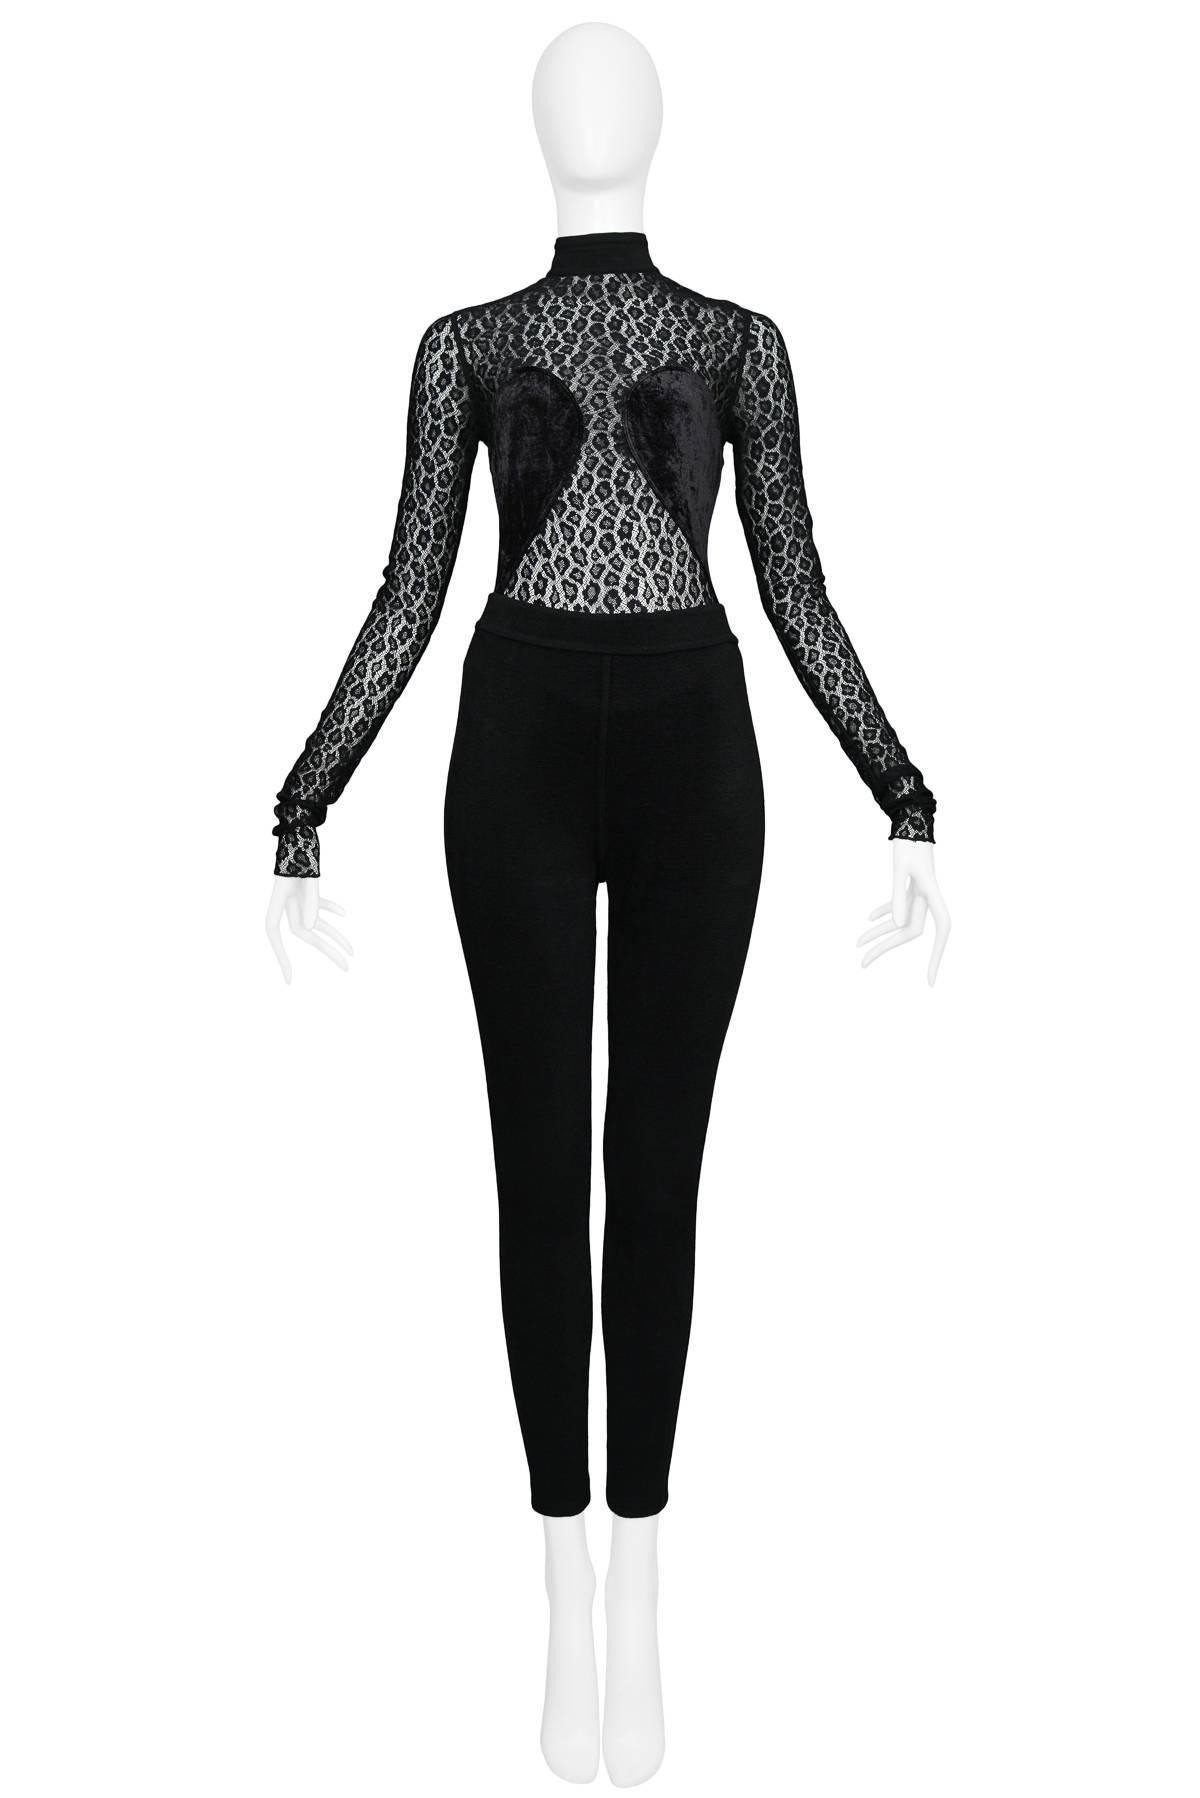 Vintage black Alaia leopard lace & velvet bodysuit ensemble featuring a high collar and long sleeves with back zip closure. Black knit leggings with lattice side seam detail. Collection AW 1991. Size : BODYSUIT M  LEGGINGS S
Condition : Excellent